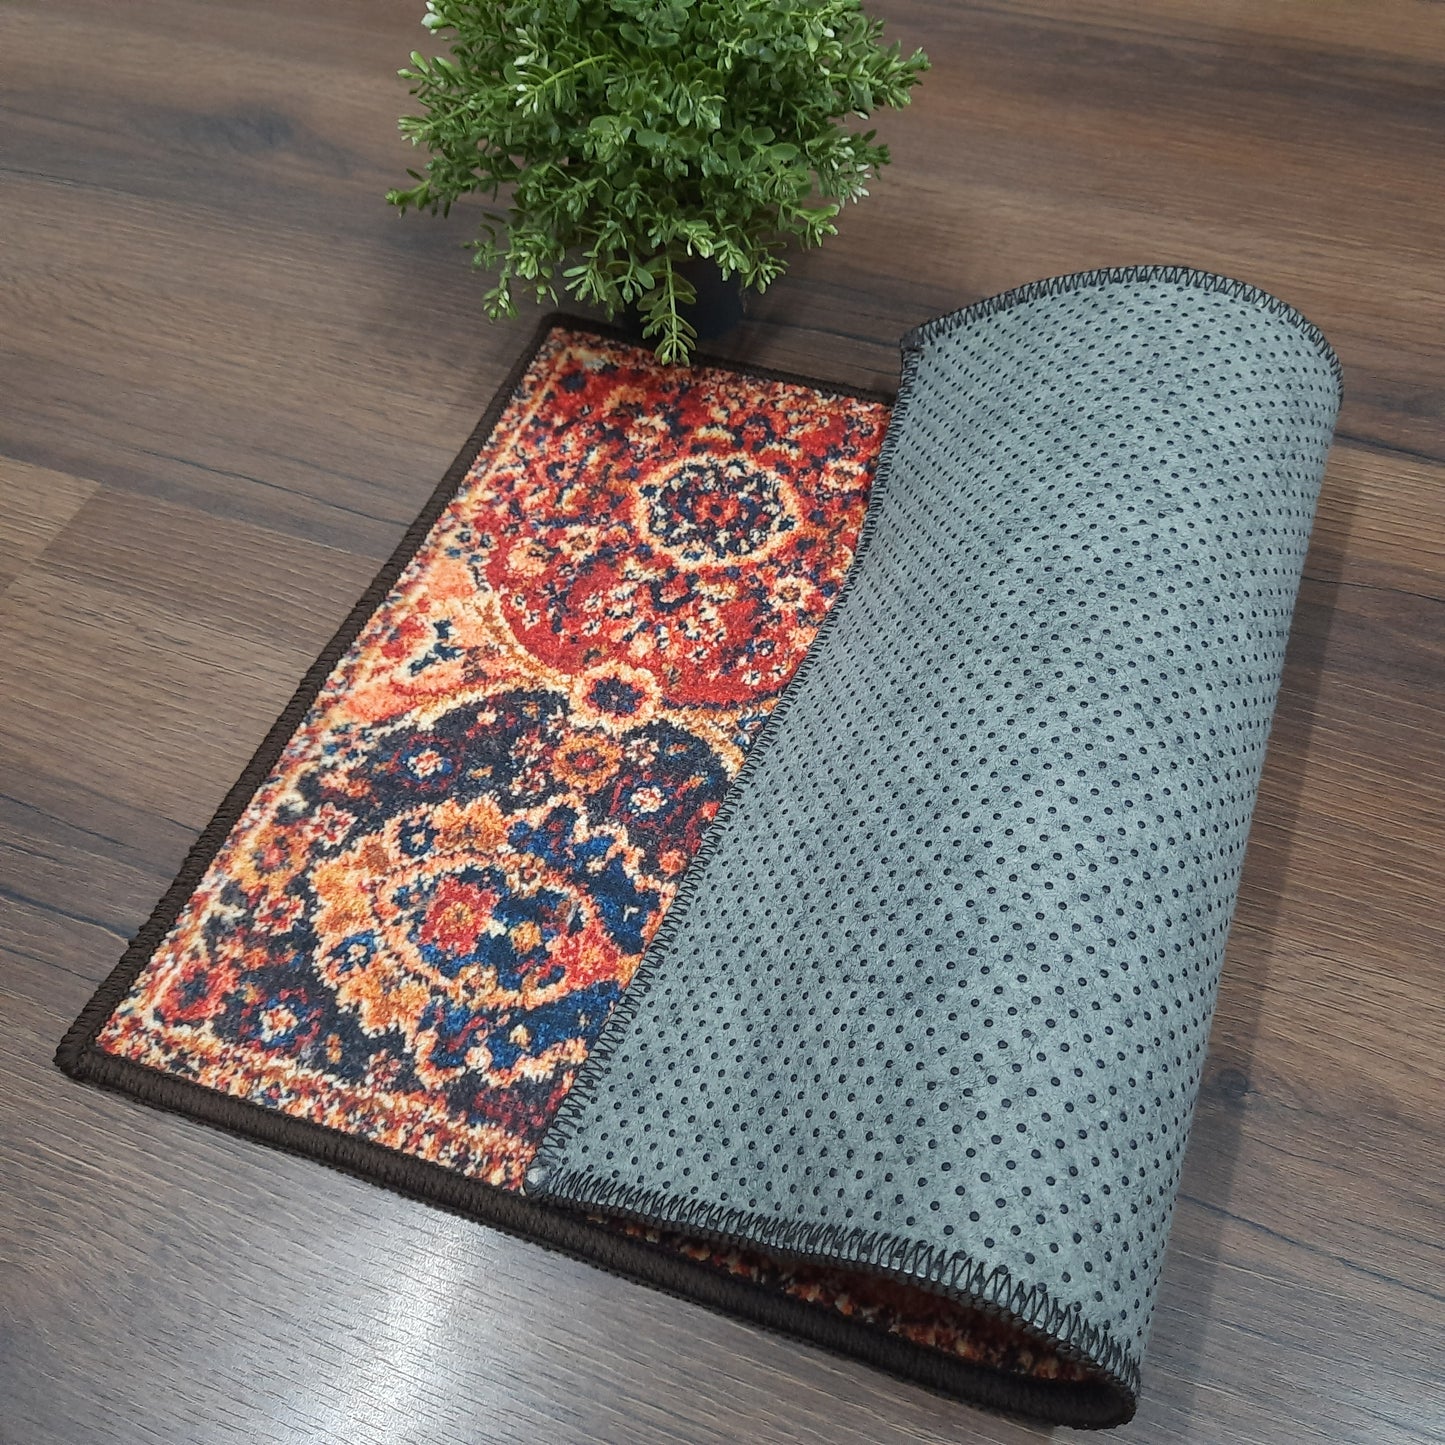 Esplendor Persian Rectangle mat Collection By Avioni Home | Anti Slip, Durable & Washable | Outdoor & Indoor